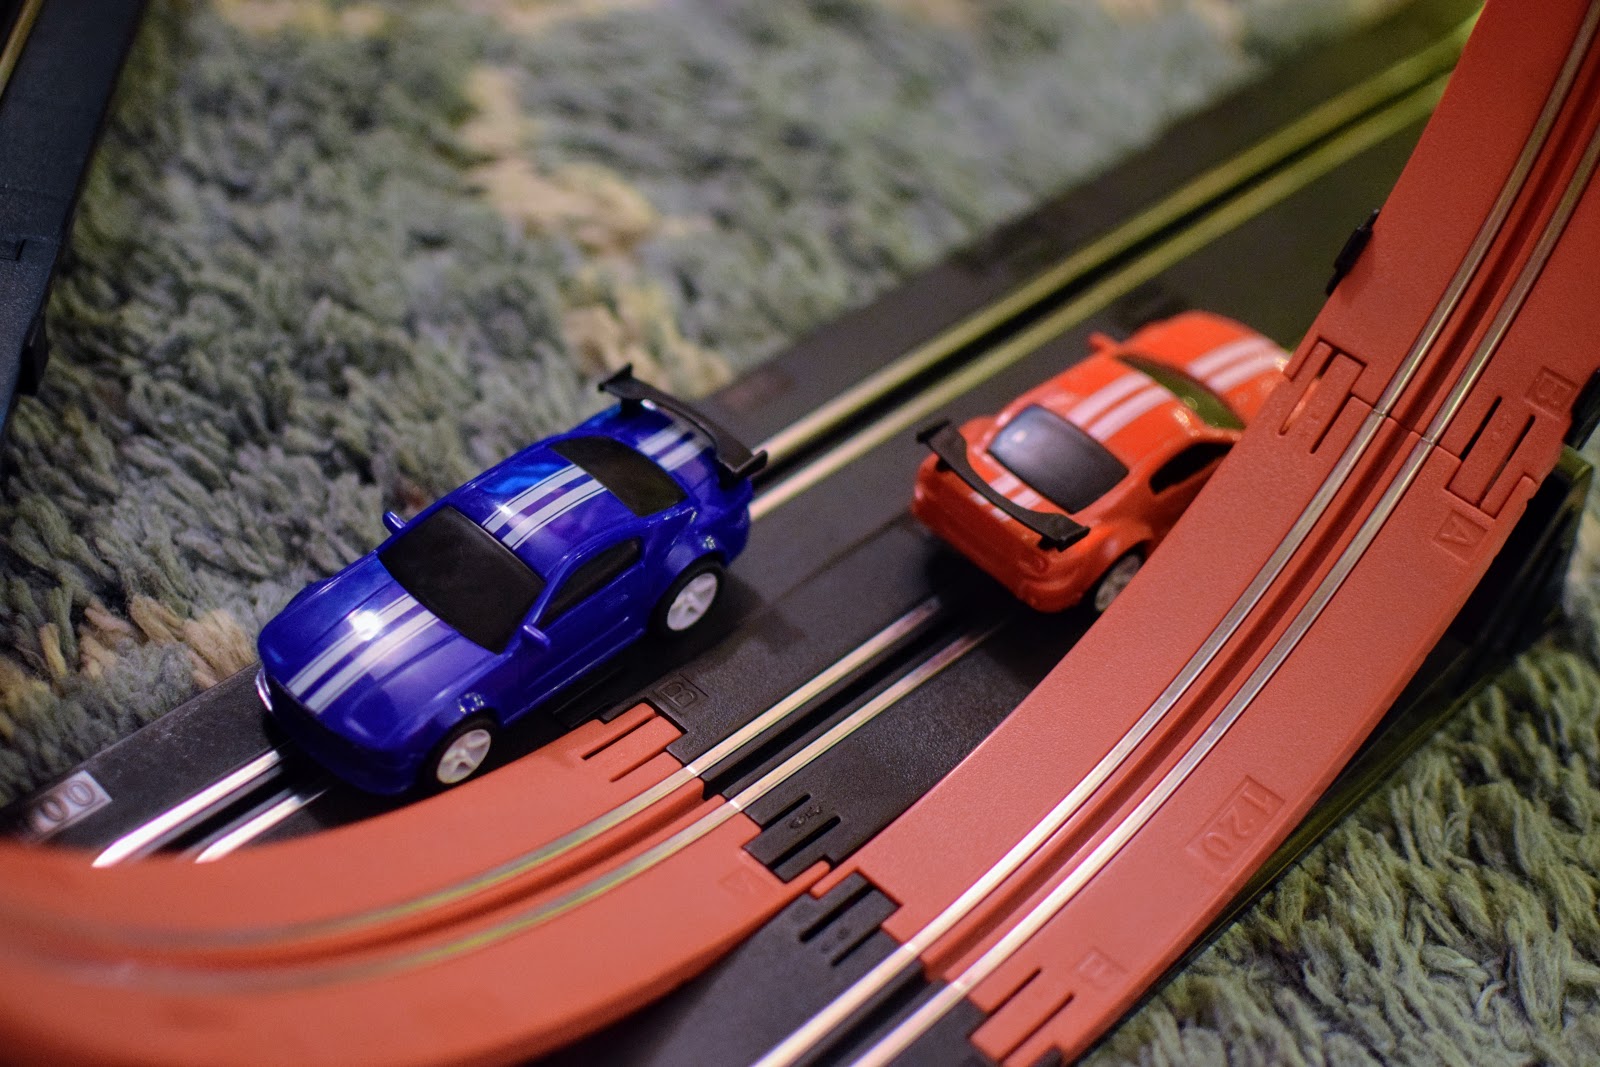 , Chad Valley Car Toys Review + Win £75 of Argos Vouchers #competition